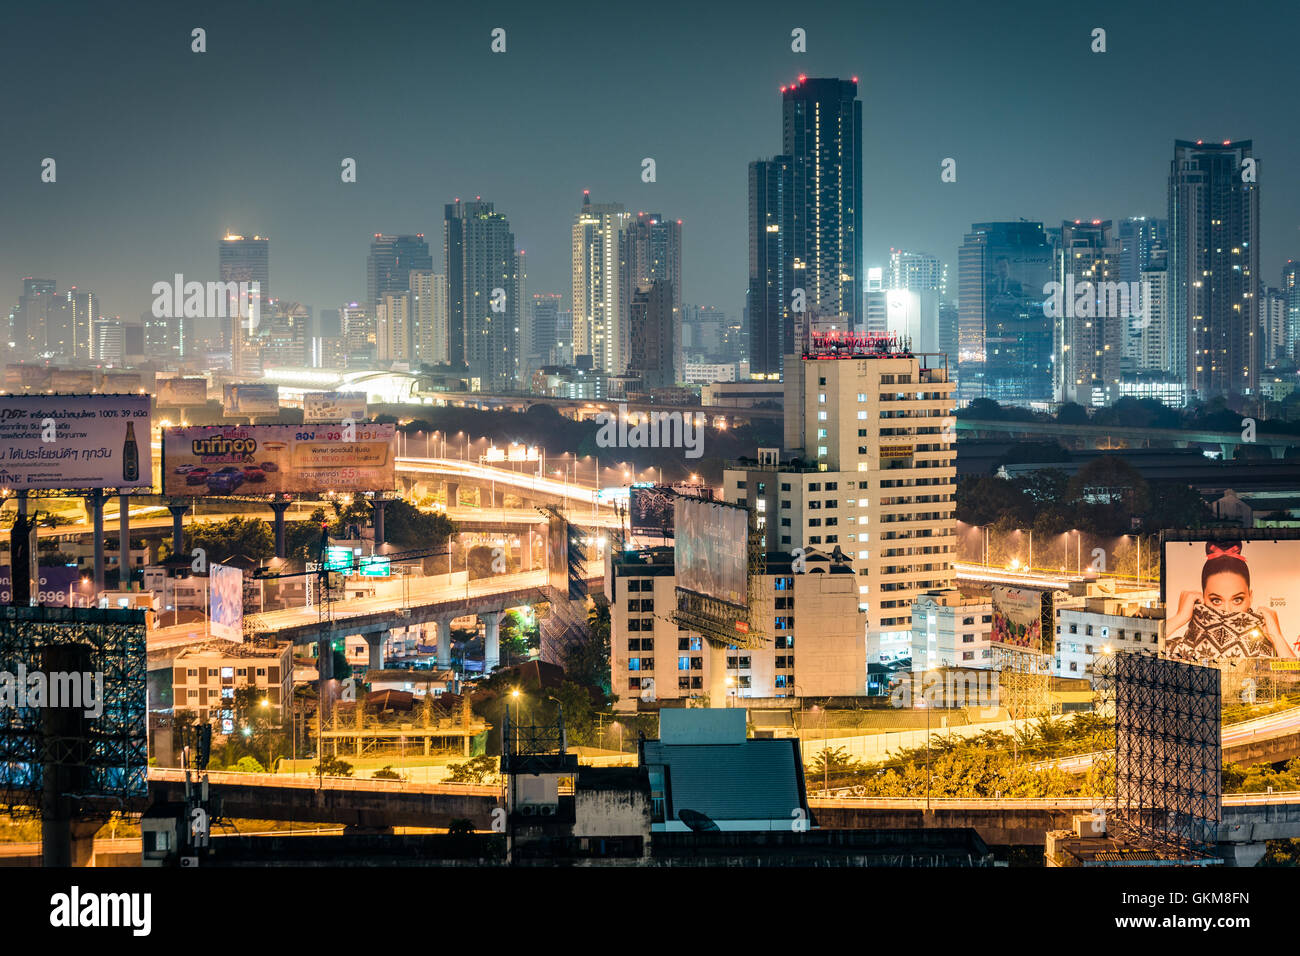 View of skyscrapers at night, in Bangkok, Thailand. Stock Photo